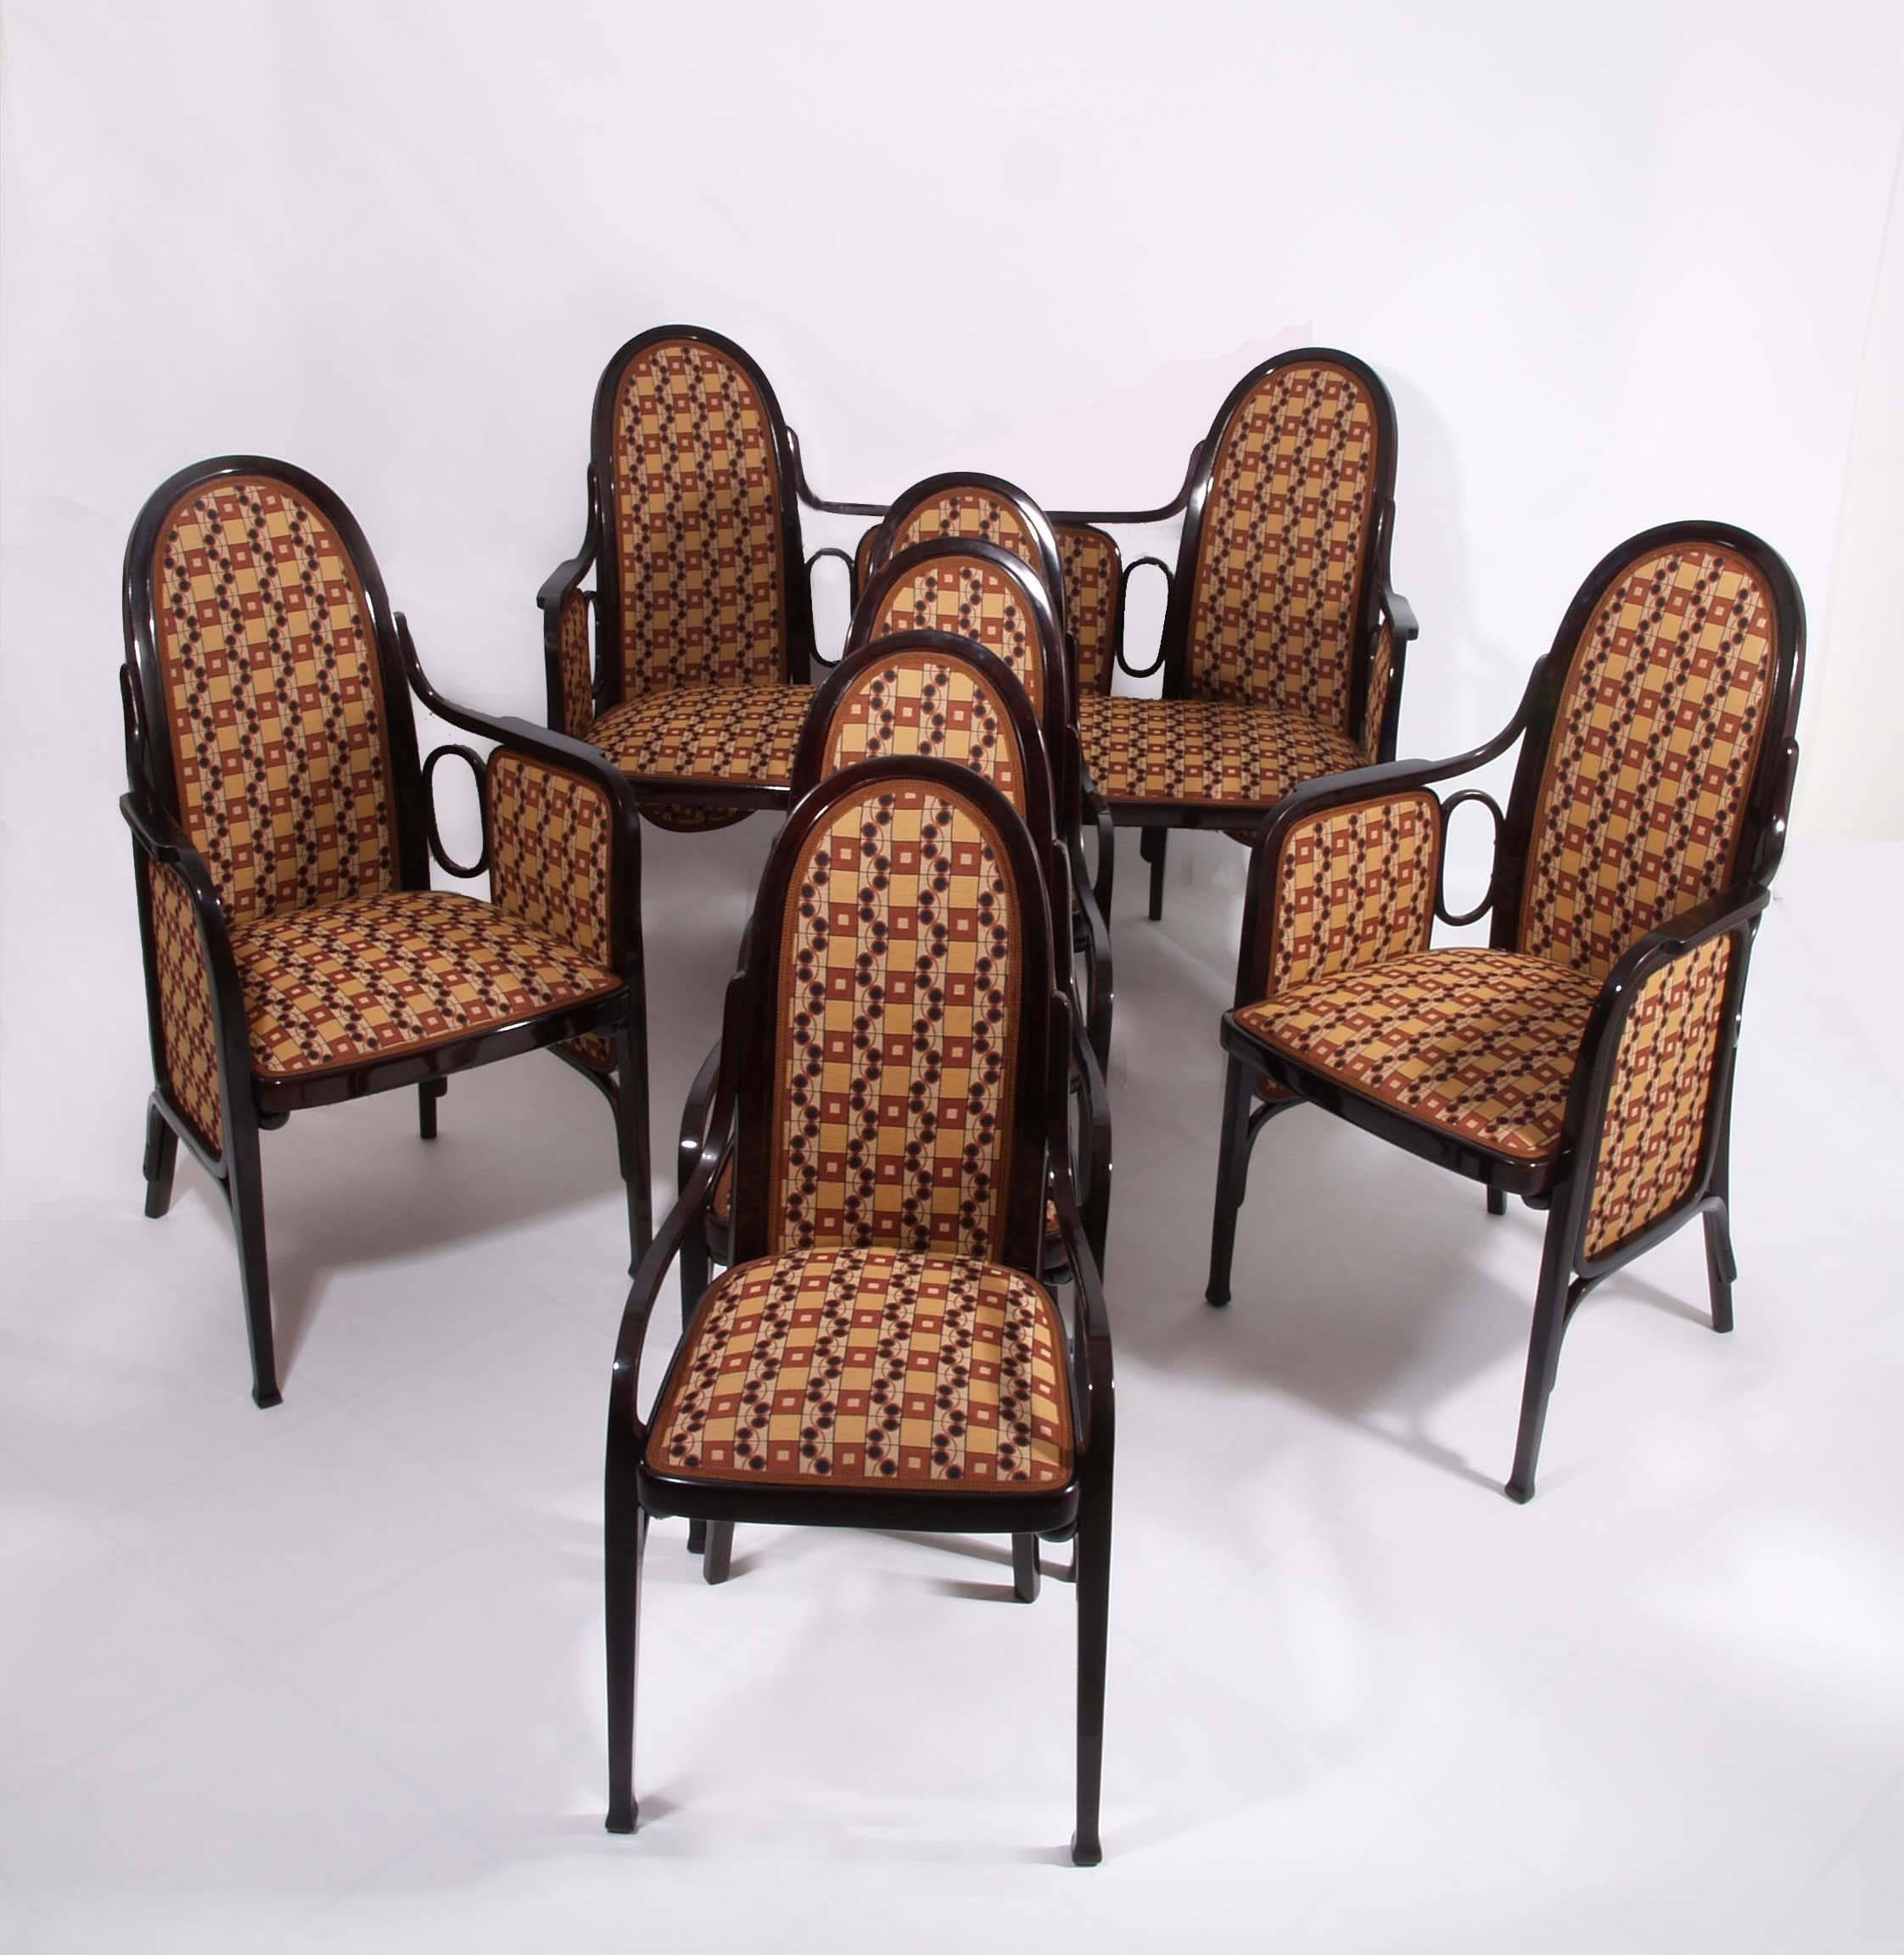 Early 20th Century Four Art Nouveau Bentwood Chairs Thonet, Vienna, 1900